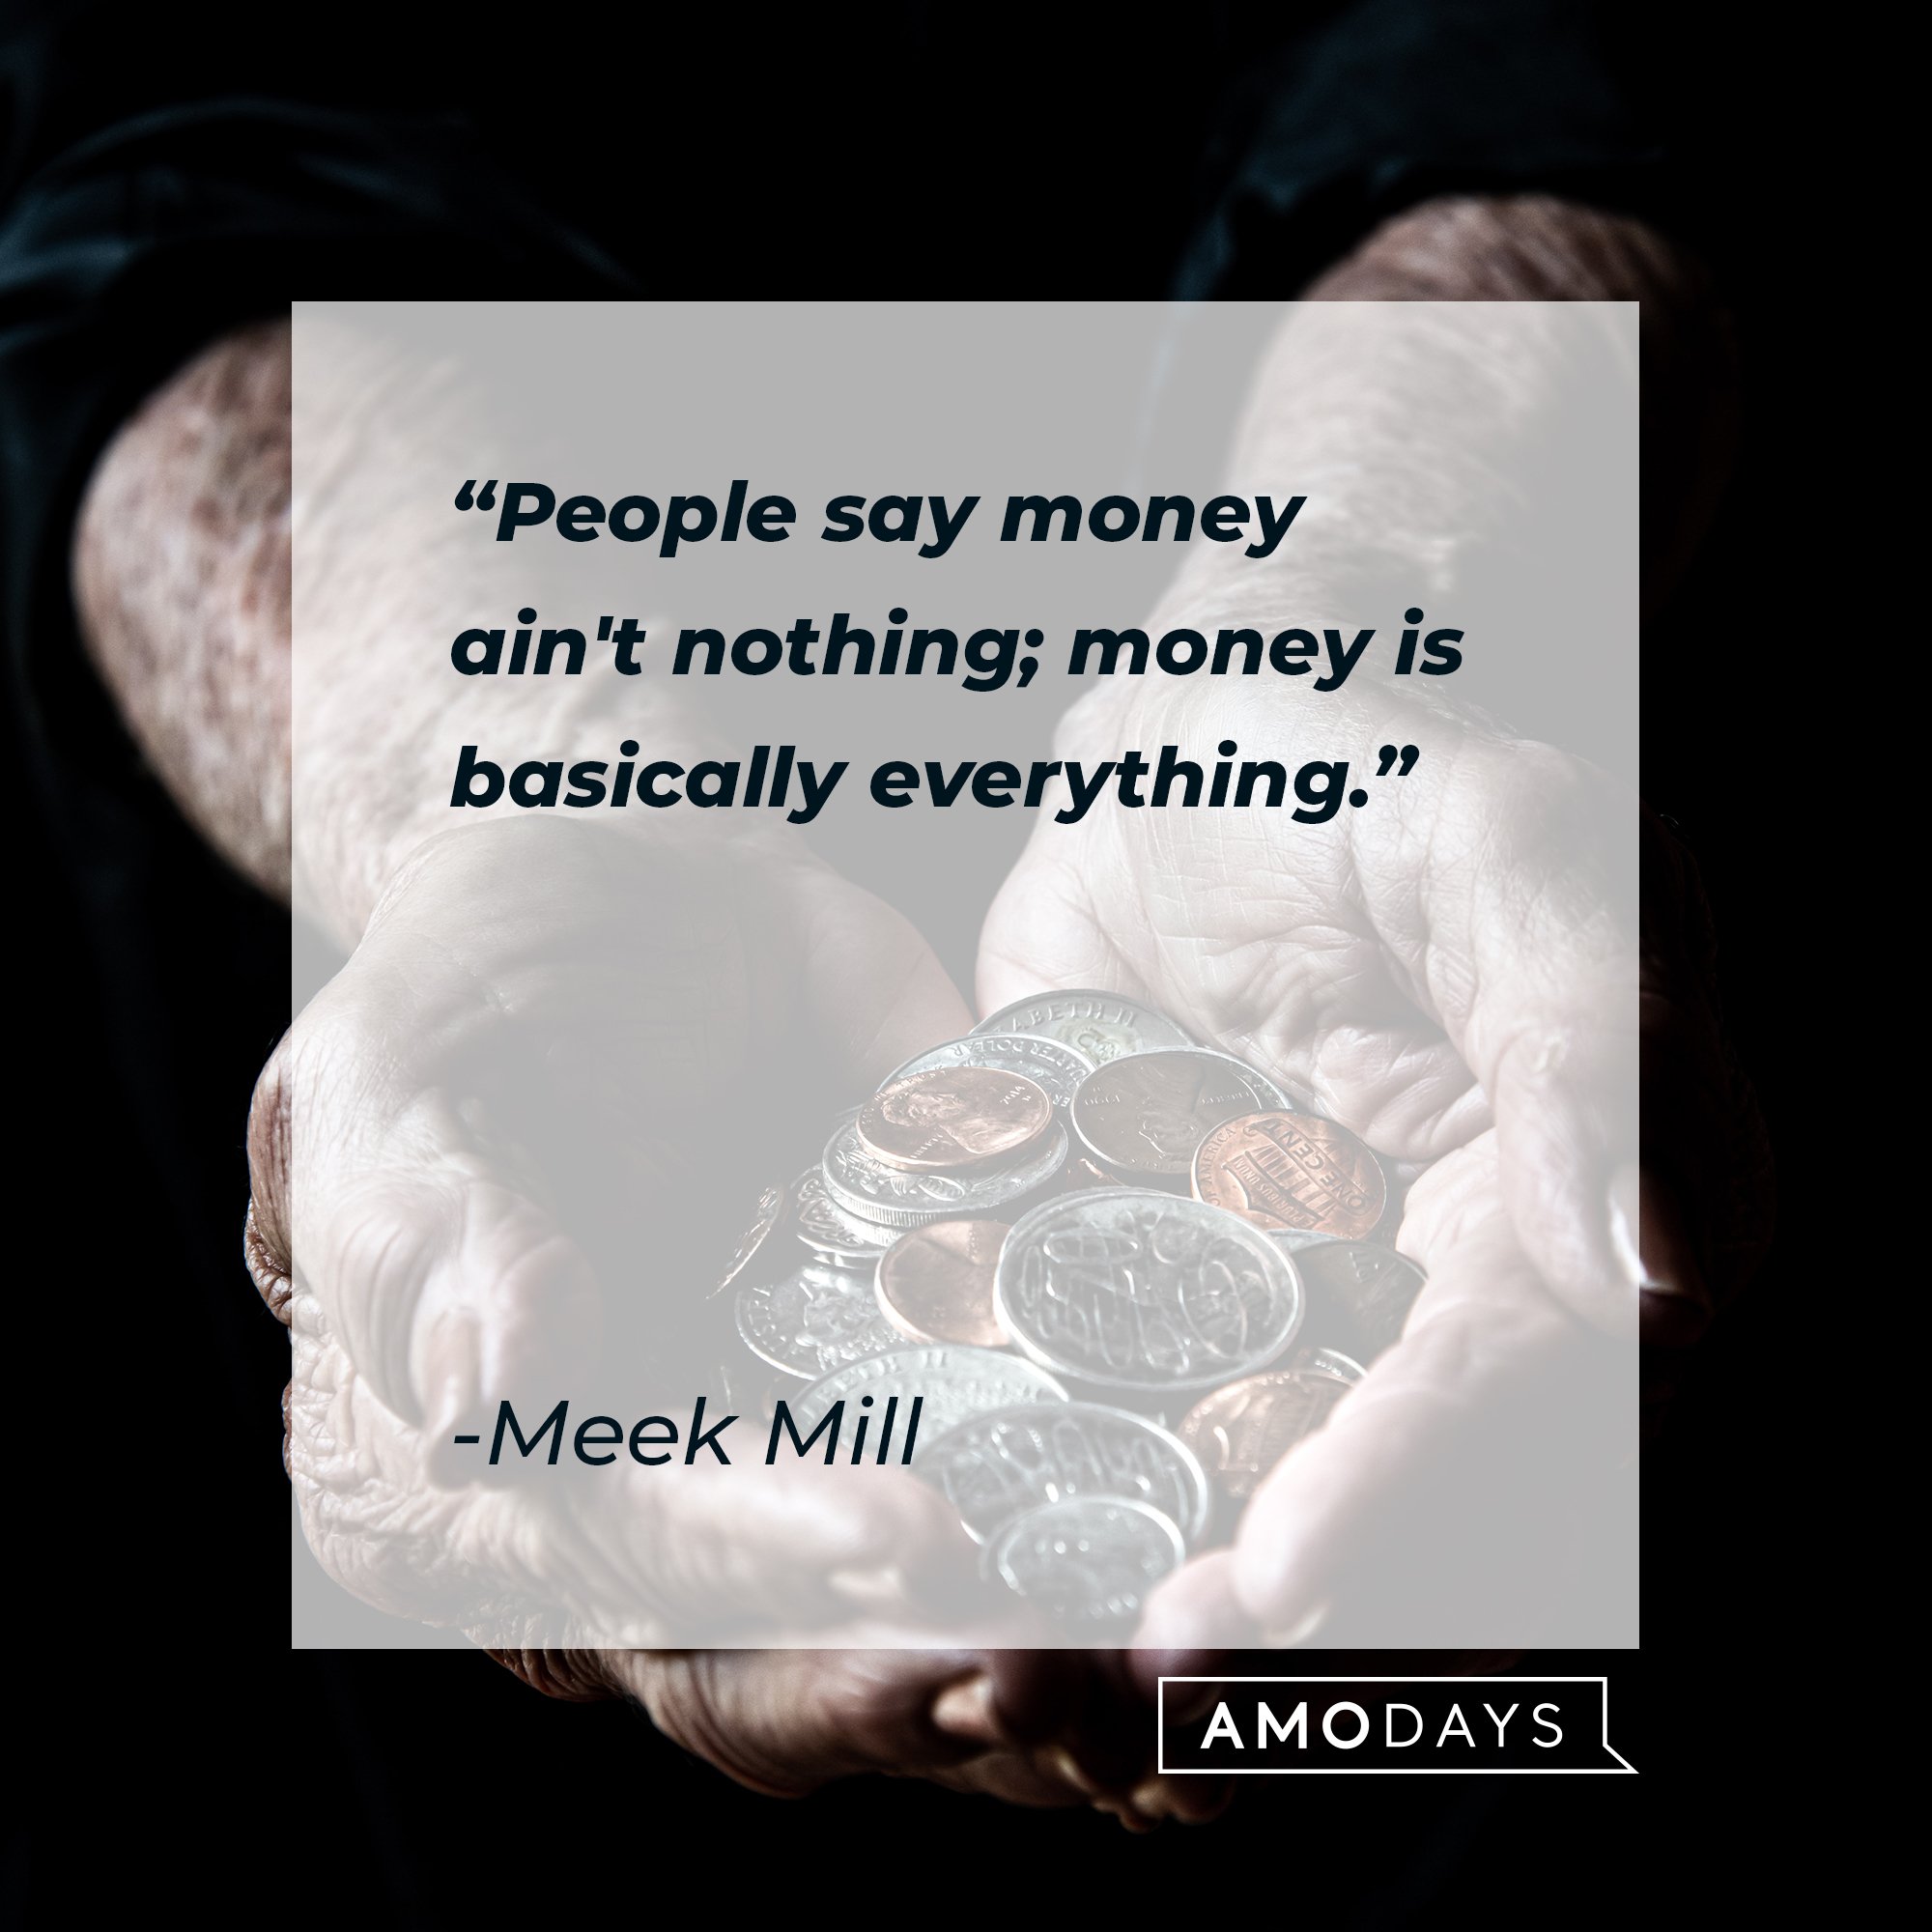   Meek Mill’s quote: "People say money ain't nothing; money is basically everything." | Image: AmoDays